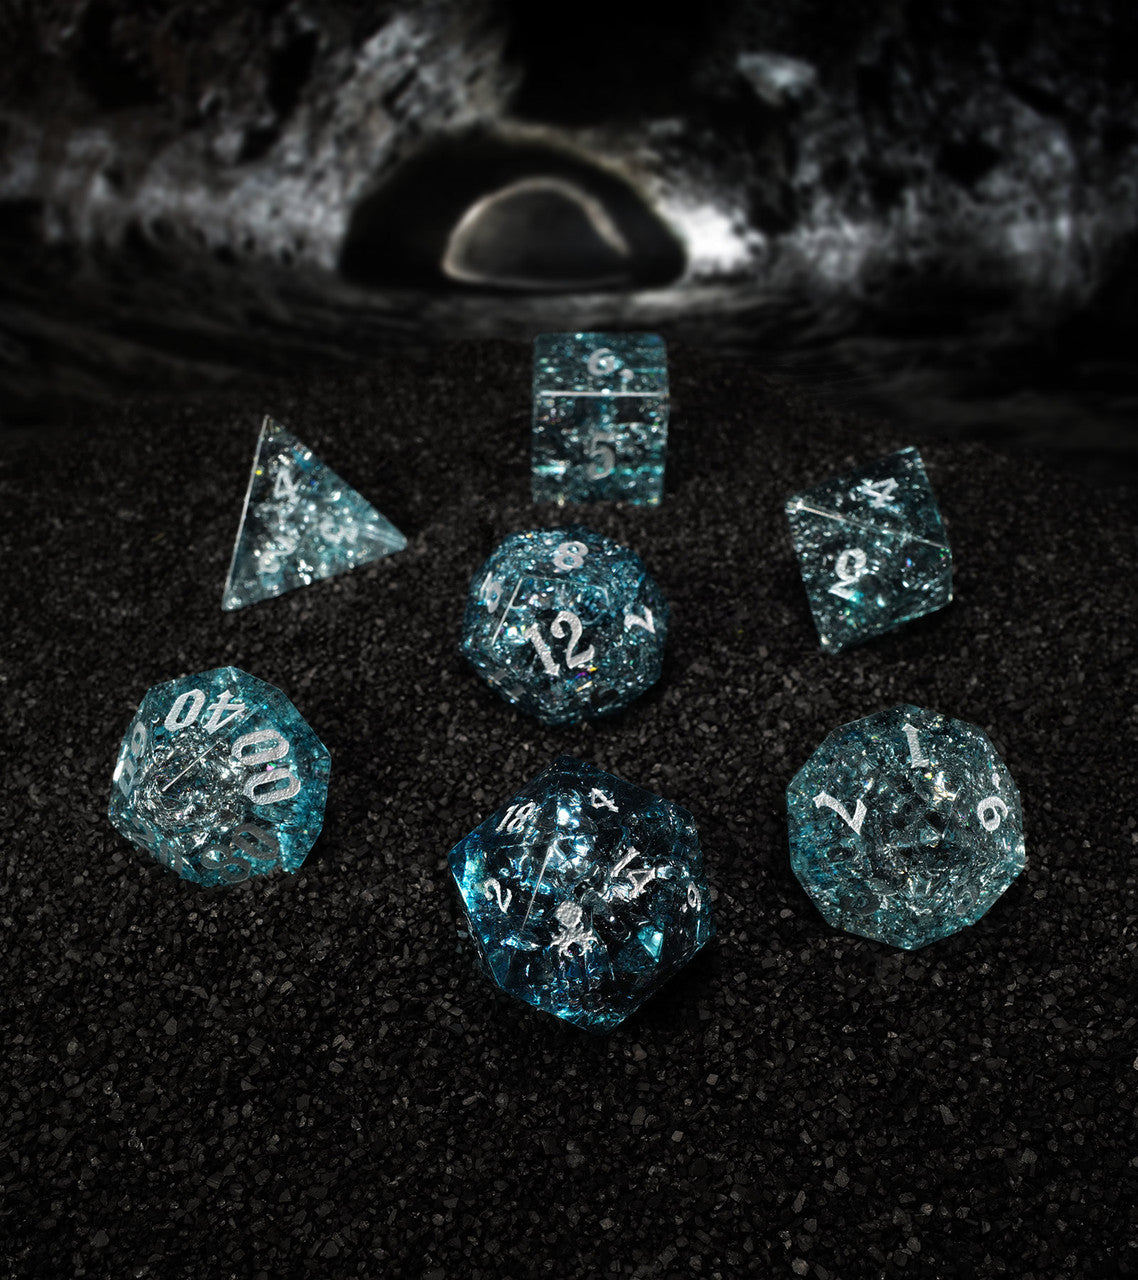 Fragments of Halley Comet Cracked Glass 7PC Glass Dice Set